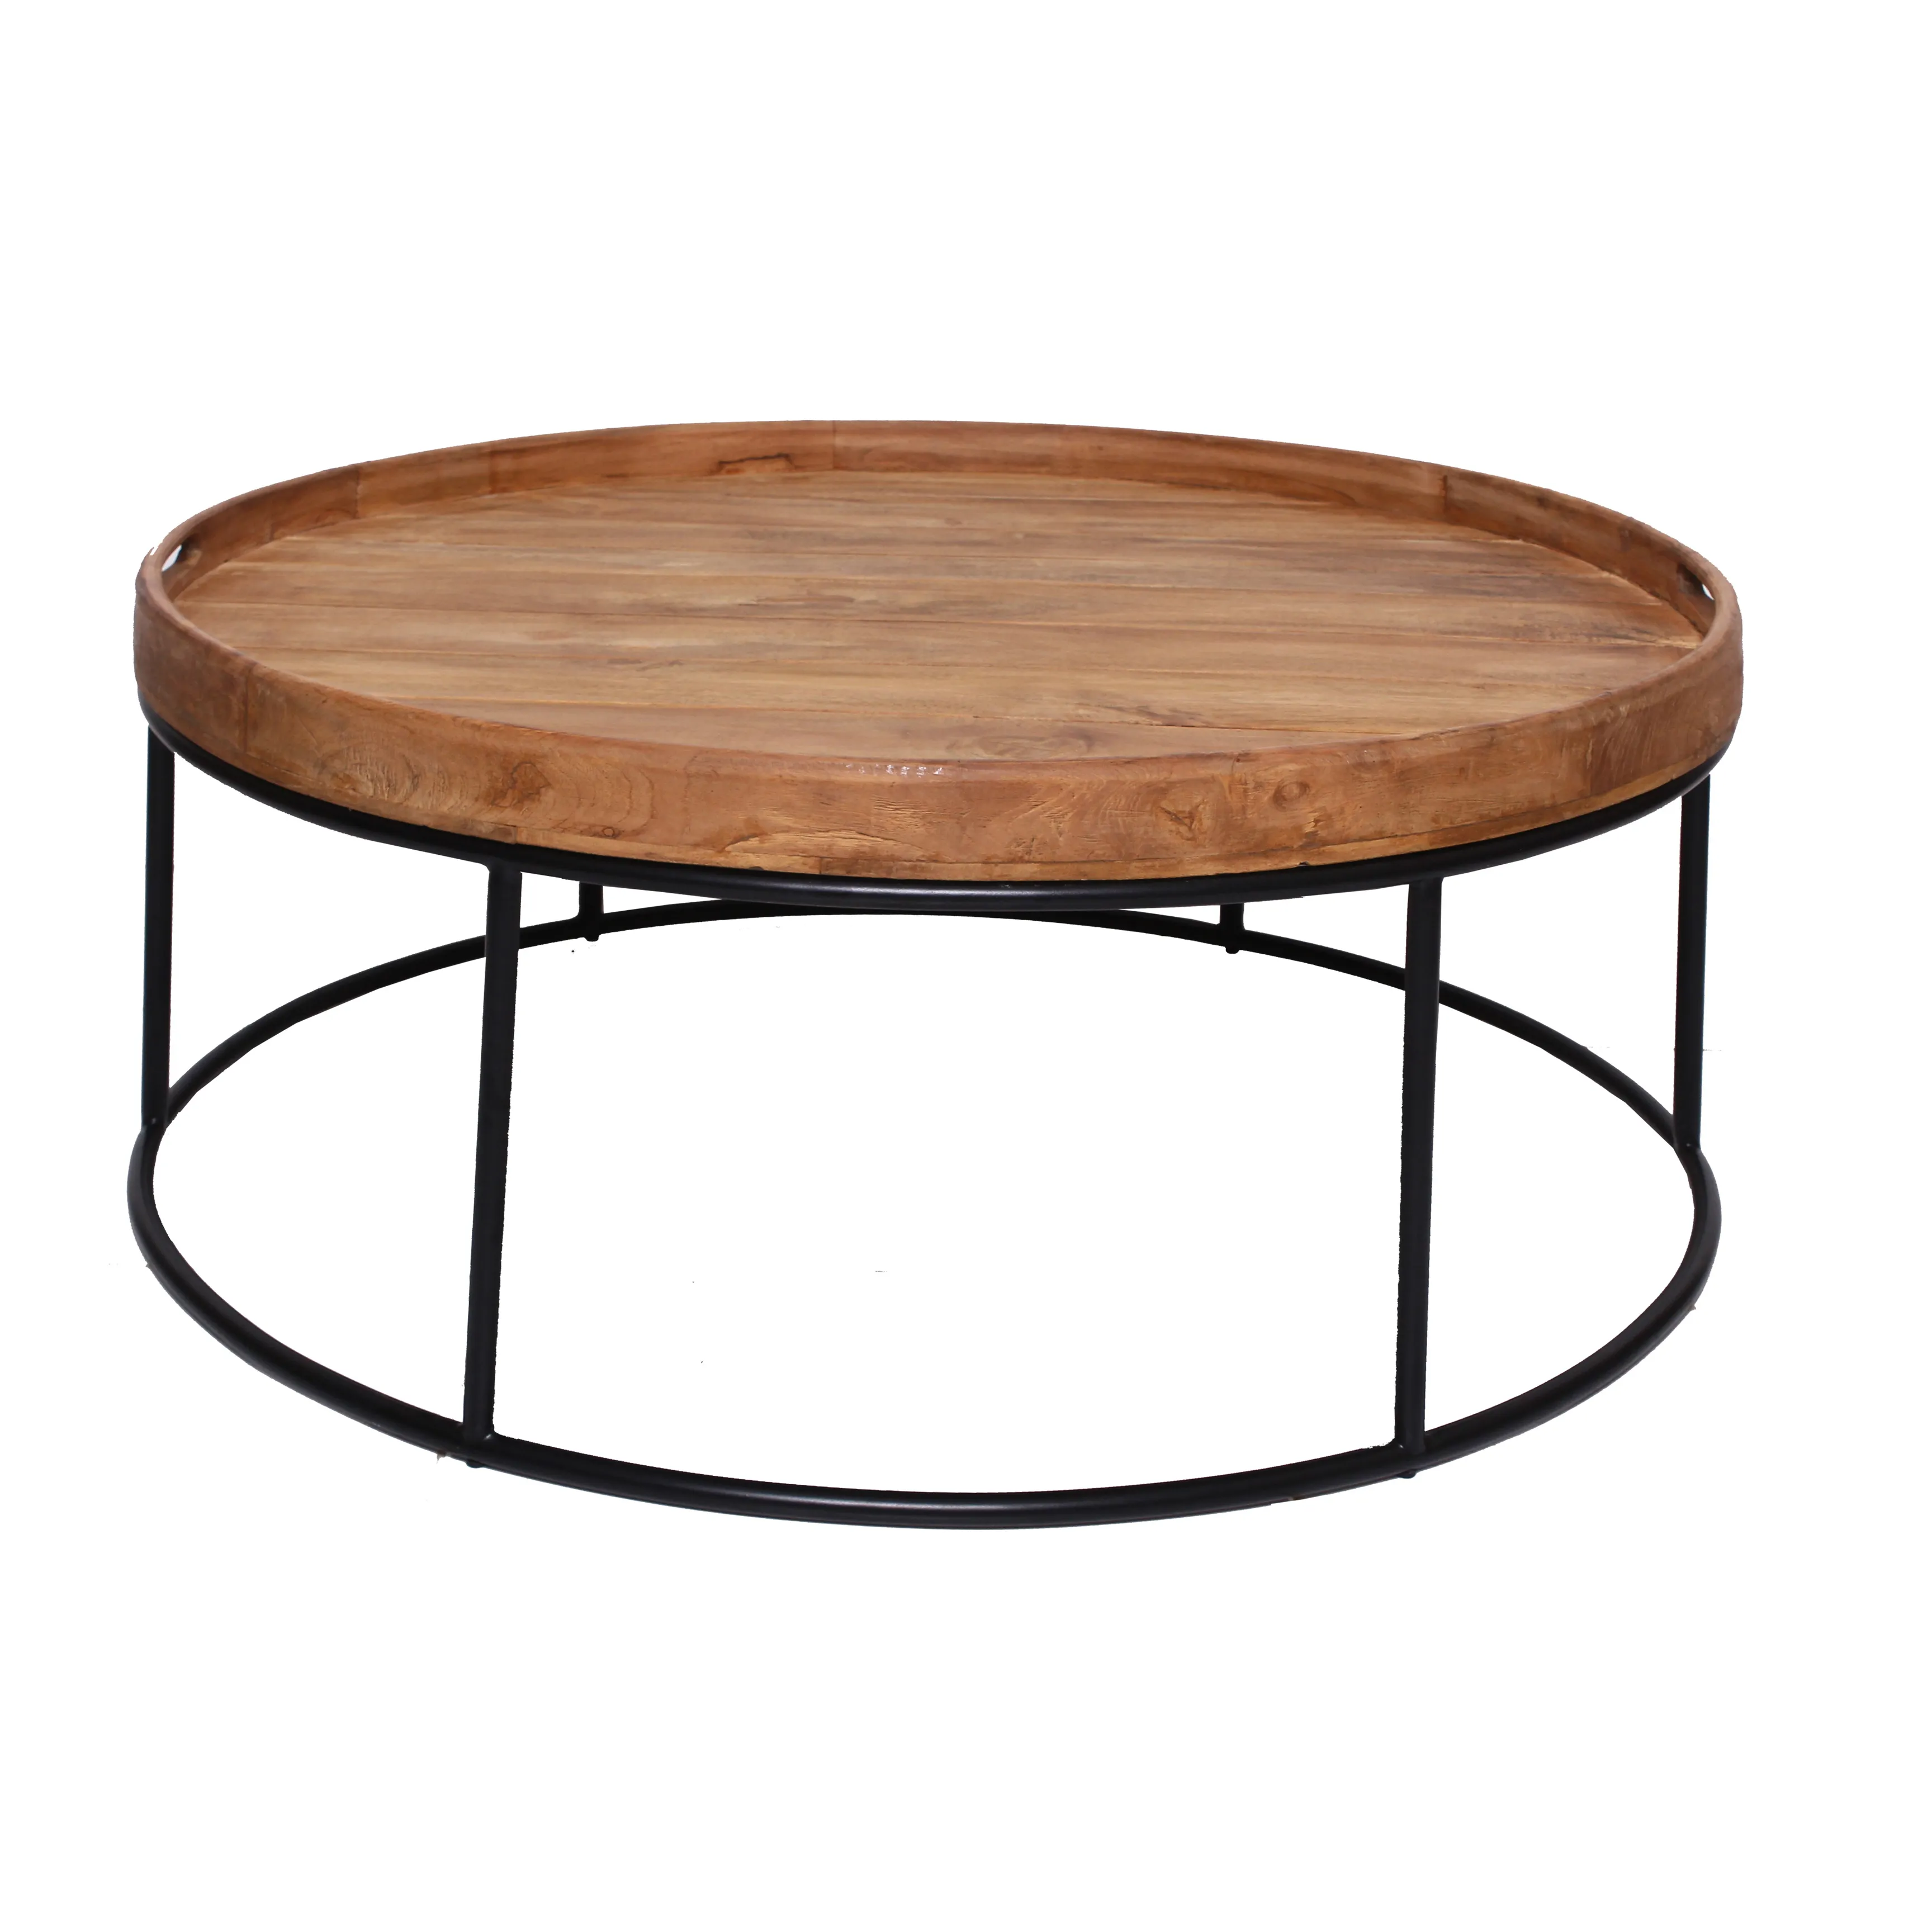 2021 New Products Popular Design Small Teak Wood Coffee Table